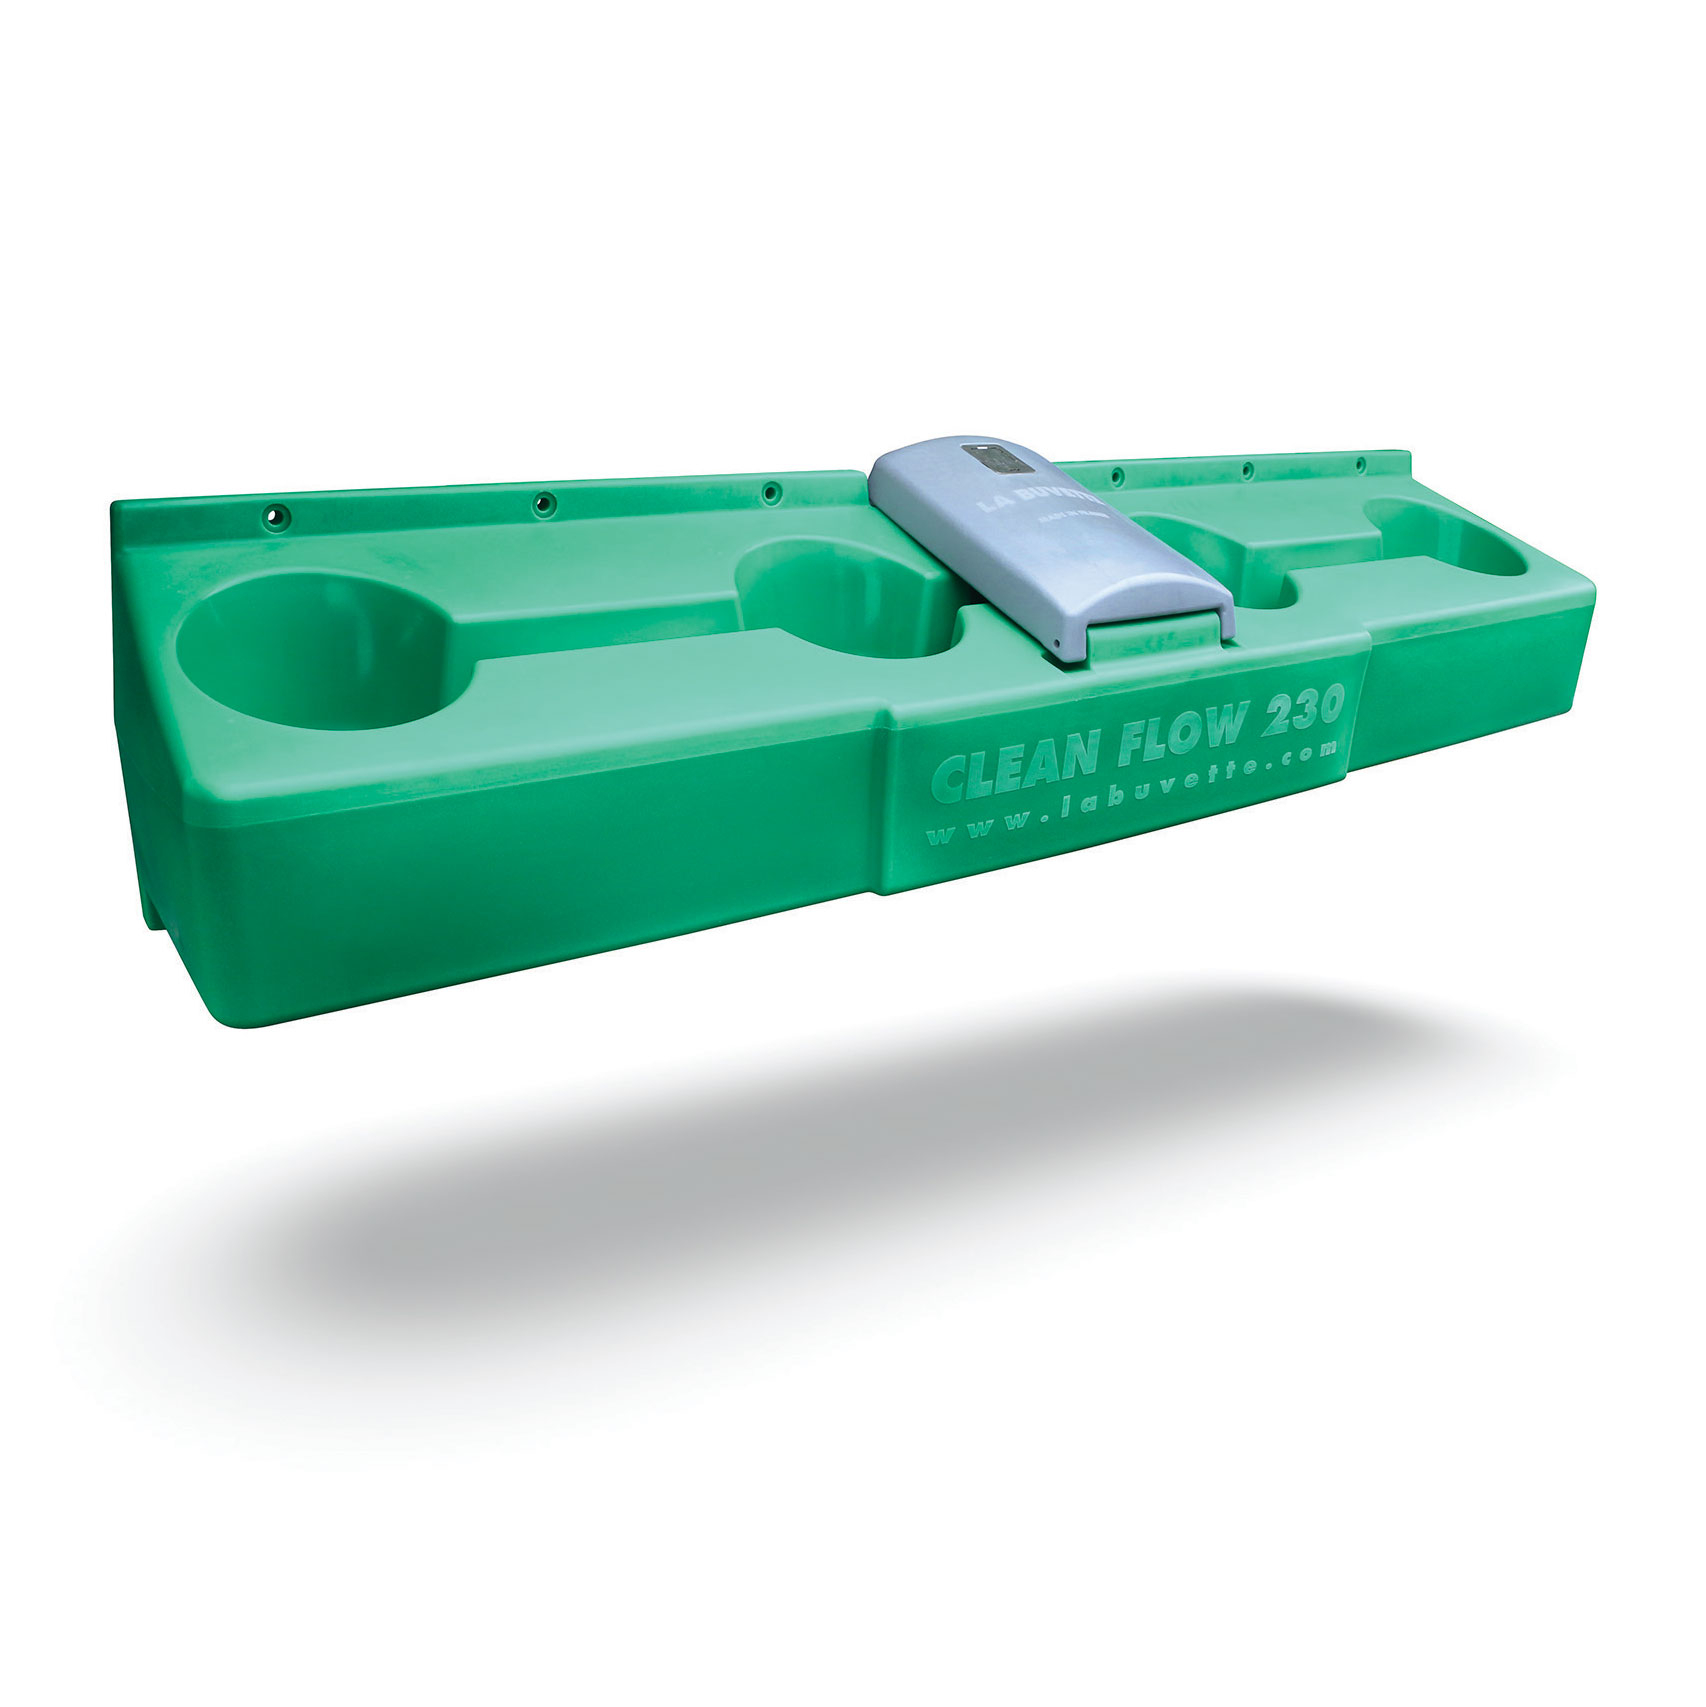 CLEAN-FLOW 230 Self-cleaning collective waterer